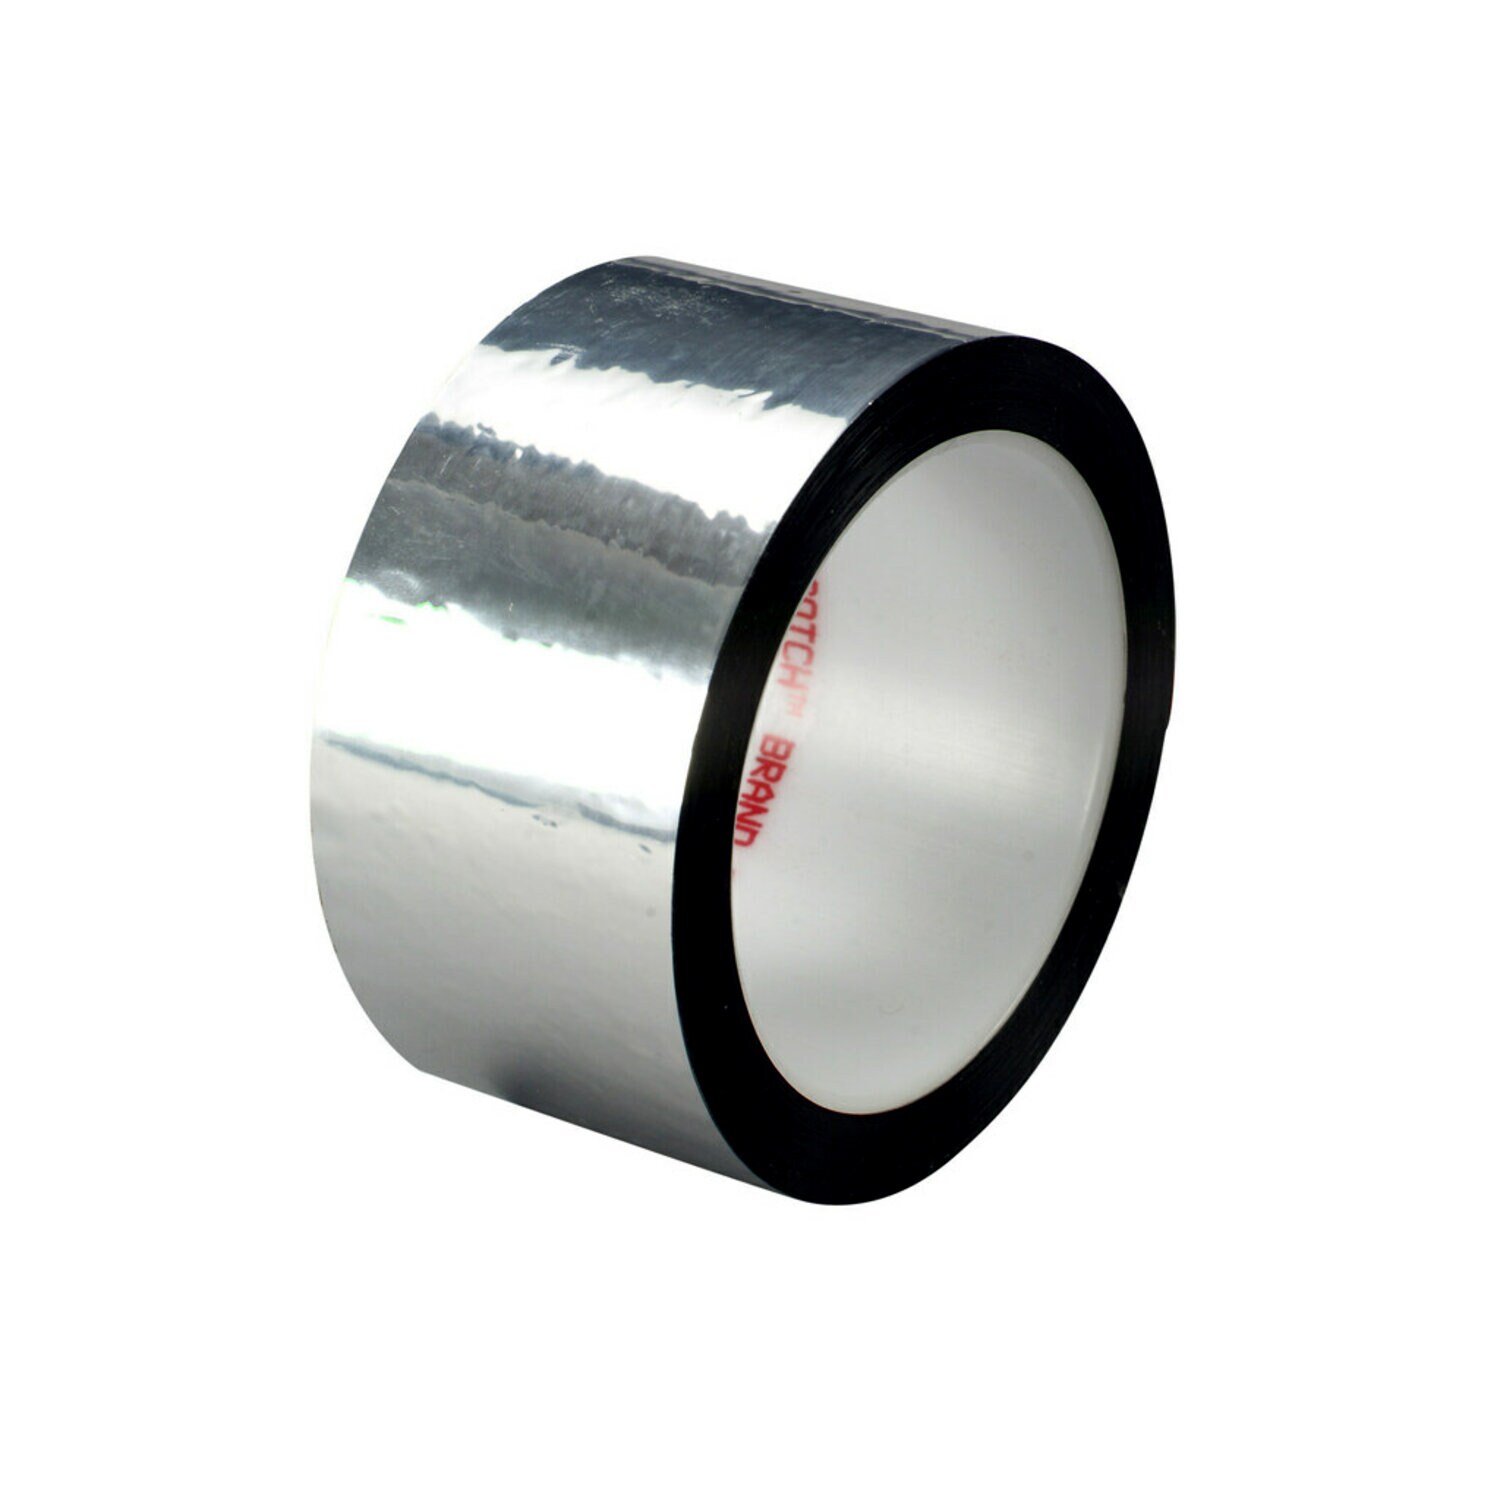 7010048673 - 3M Polyester Film Tape 850, Silver, 48 in x 72 yd, 1.9 mil, 1 roll per
case